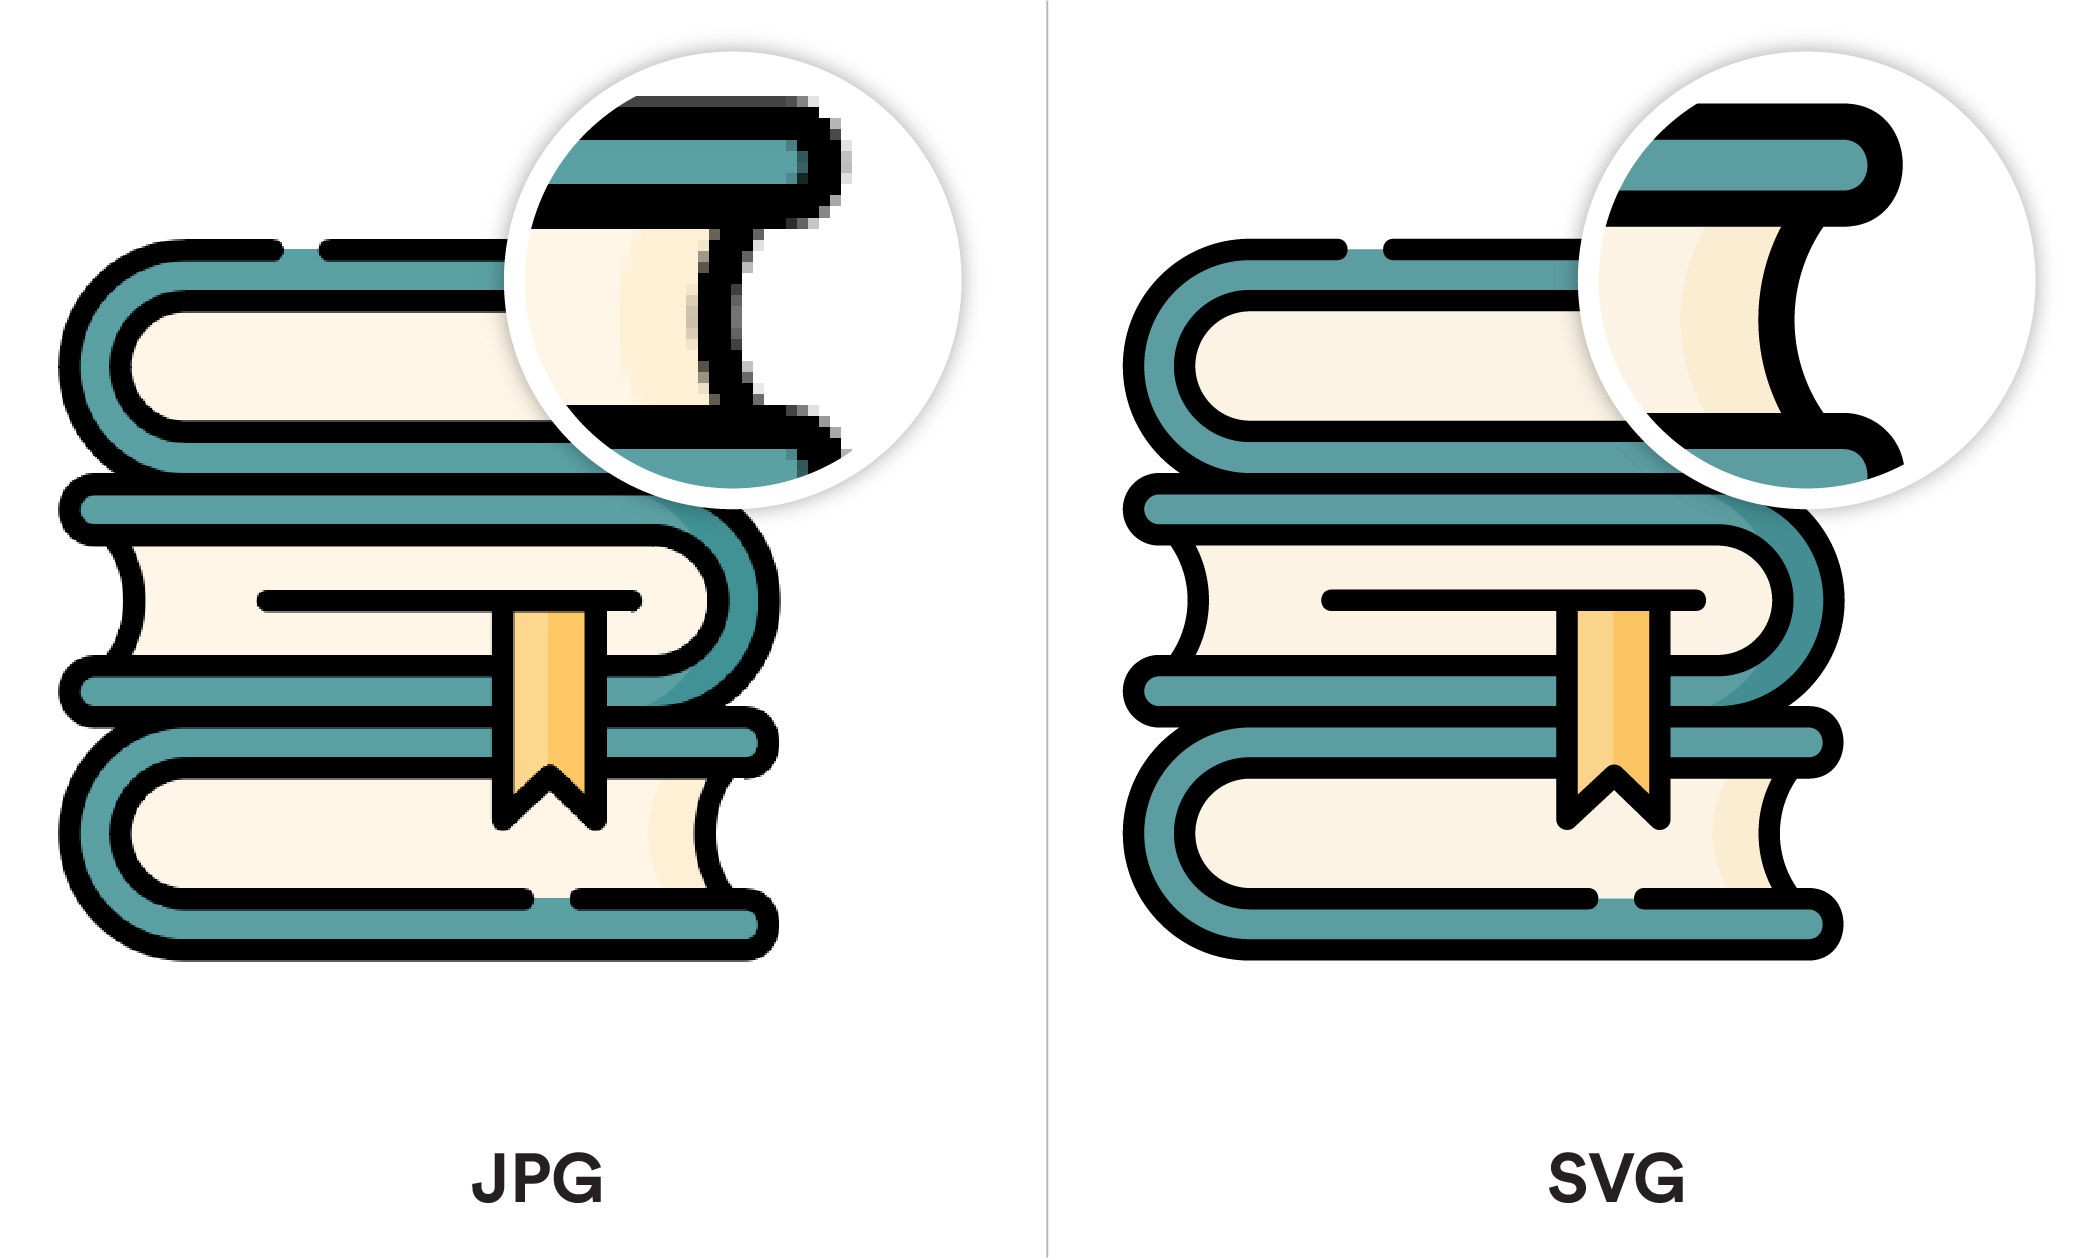 Pixelation observed in JPG images and not in SVGs example